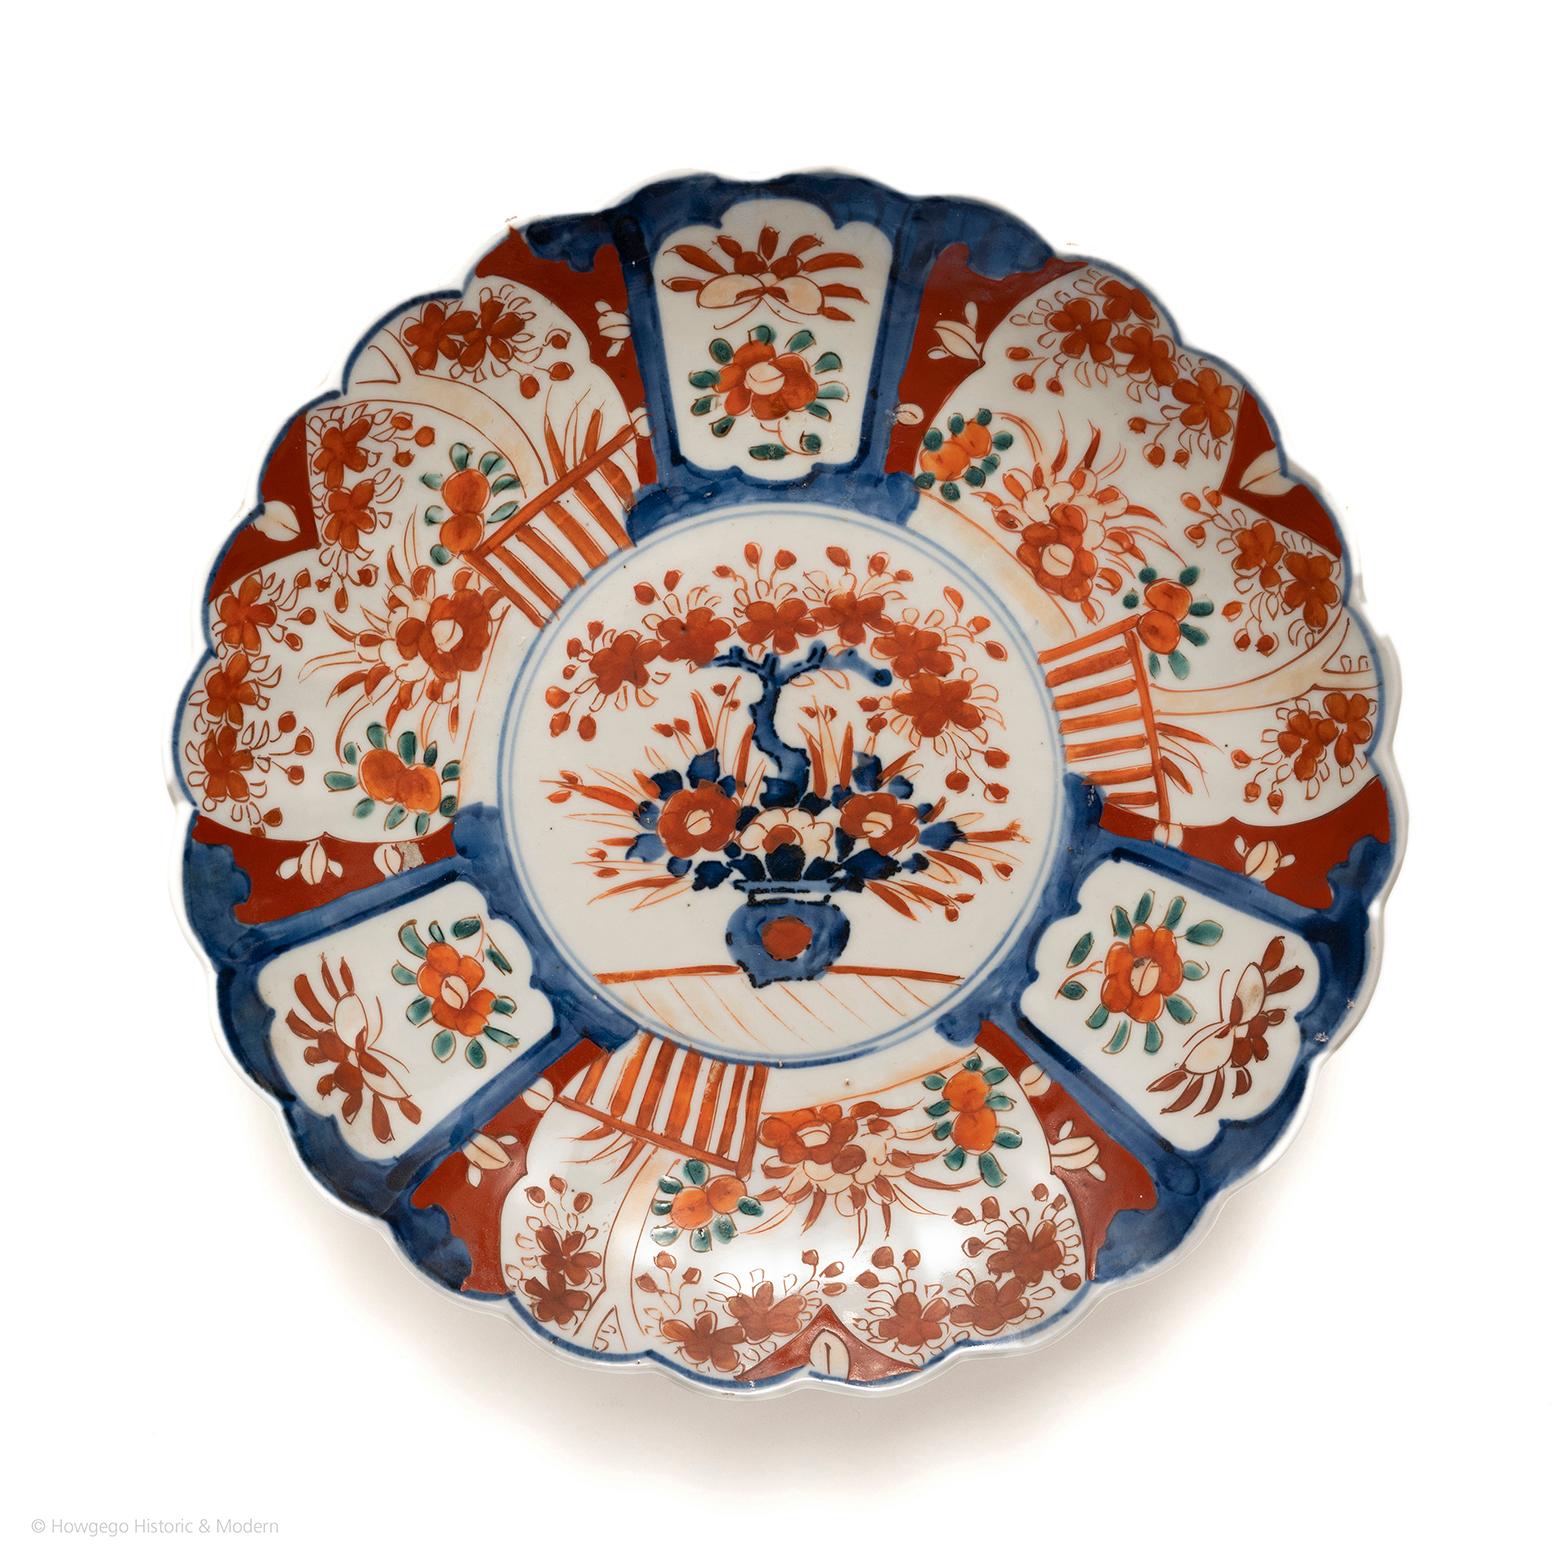 Exceptional 18th century Imari lobed dish. The centre painted with a vase of flowers and a bonsai tree. Surrounded by a double circle border and three large vignettes of a fenced garden with trees and flowers and stylised floral vignettes